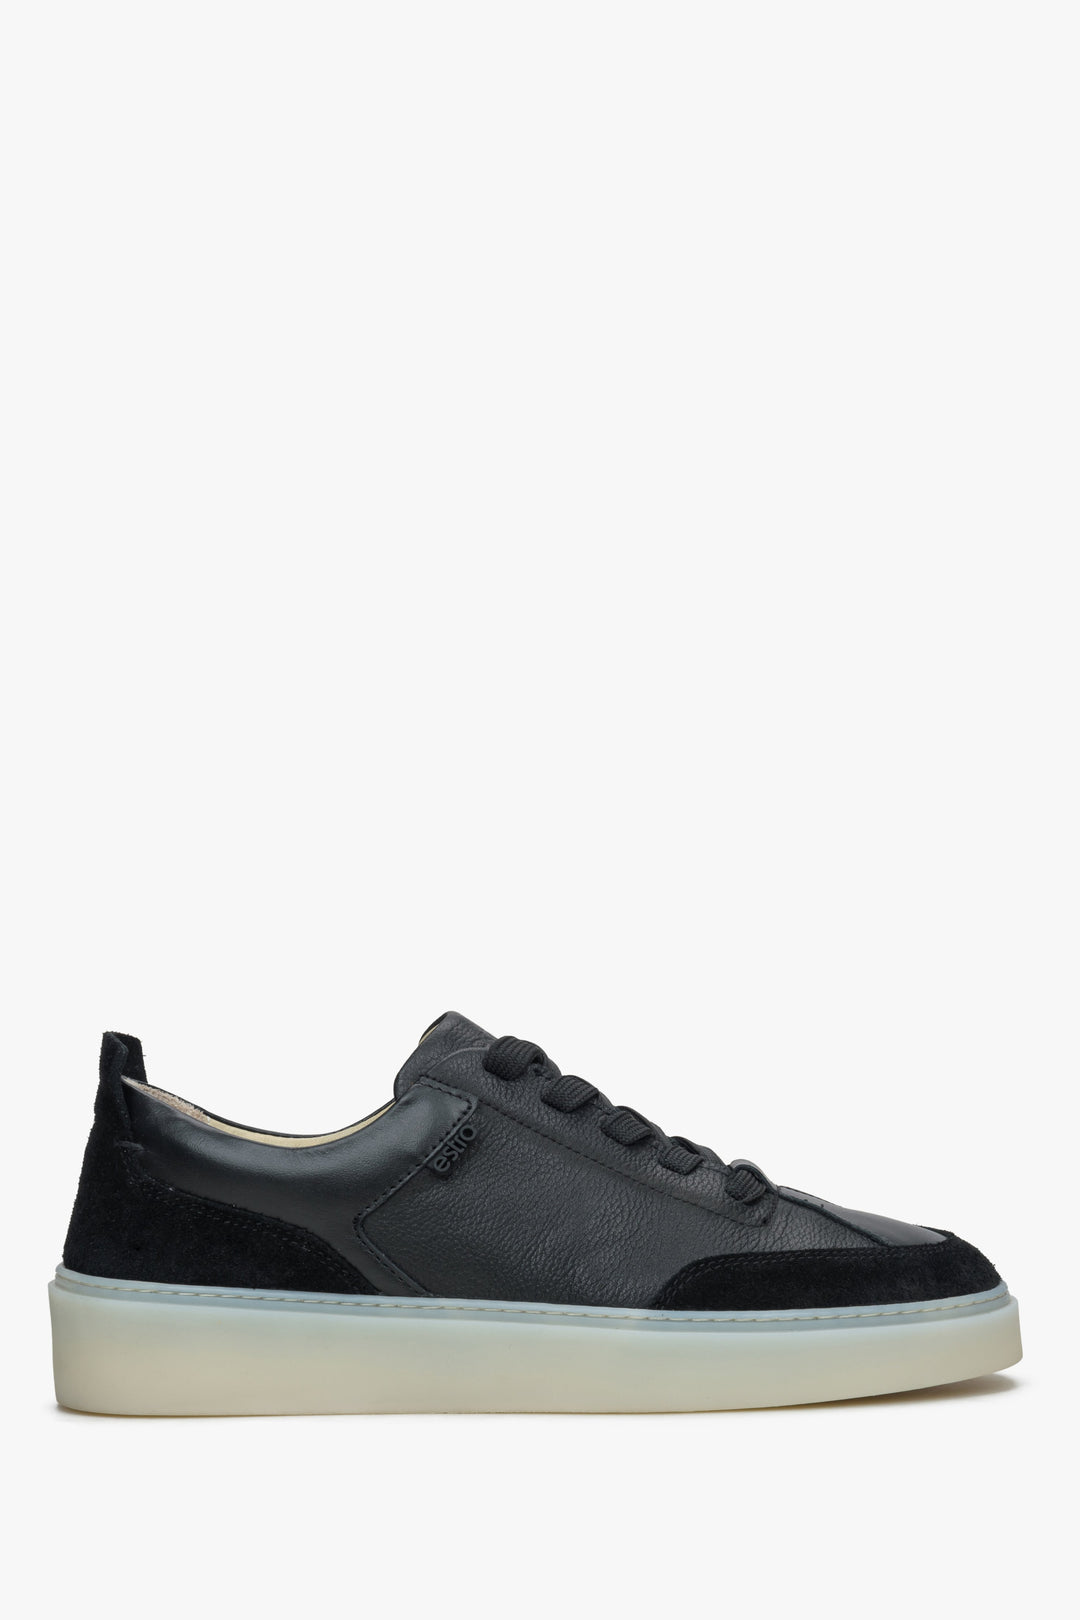 Women's Black Low-Top Sneakers made of Genuine Italian Leather and Velour ER00114892